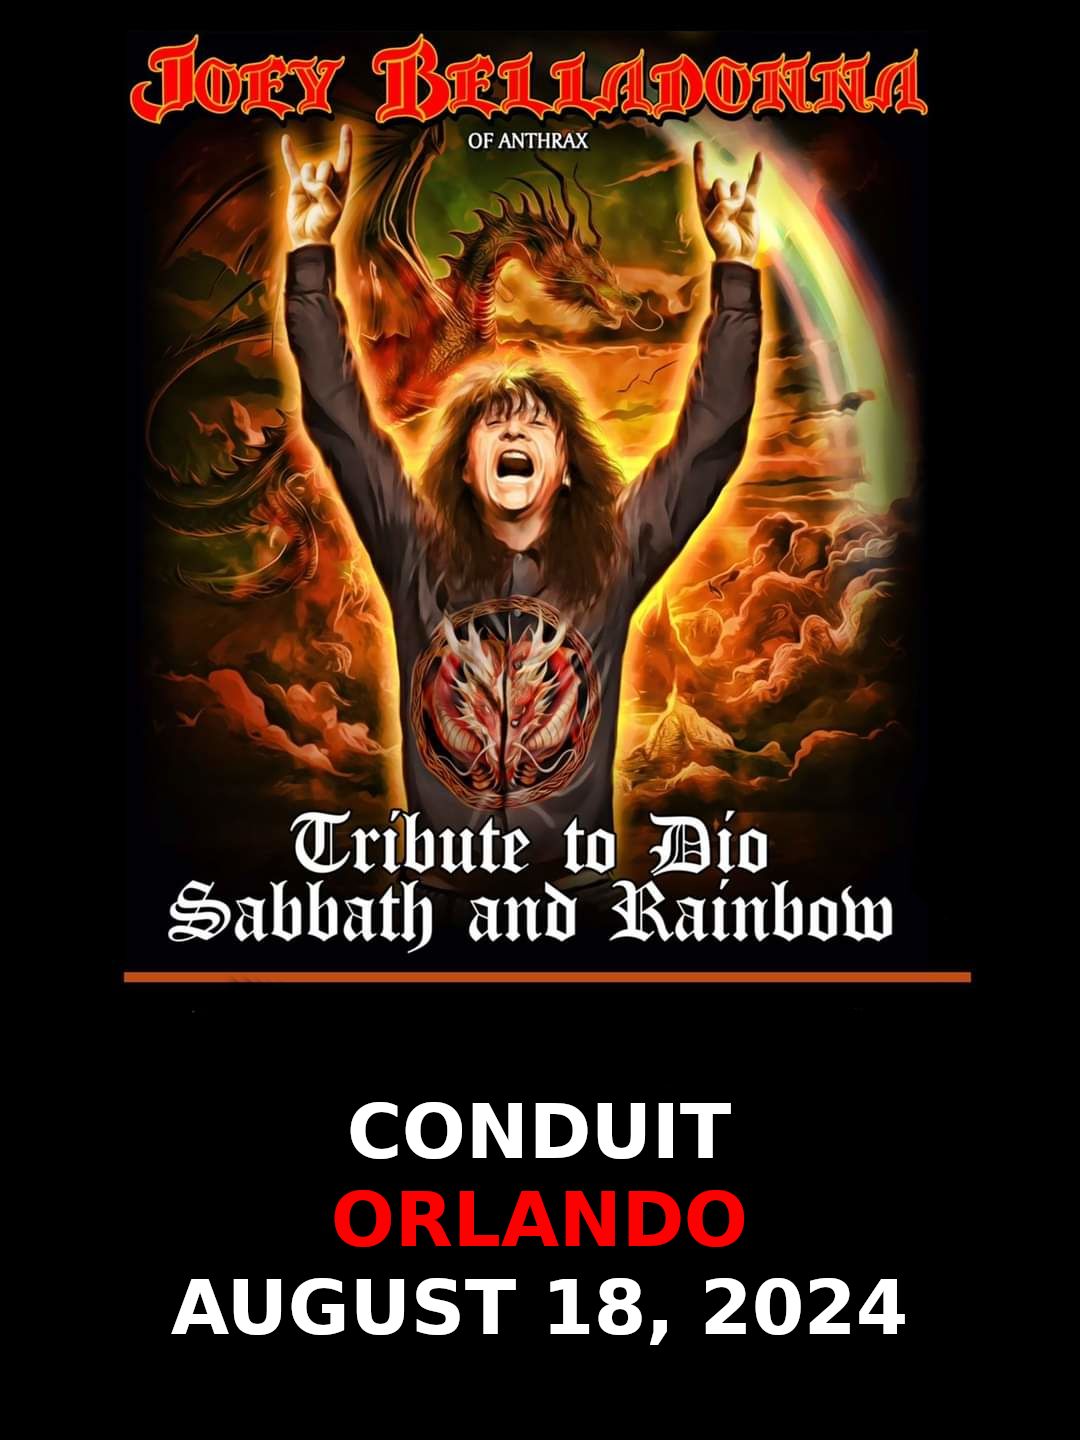 Joey Belladonna (from Anthrax) tribute to Dio, Black Sabbath, and Rainbow in Orlando